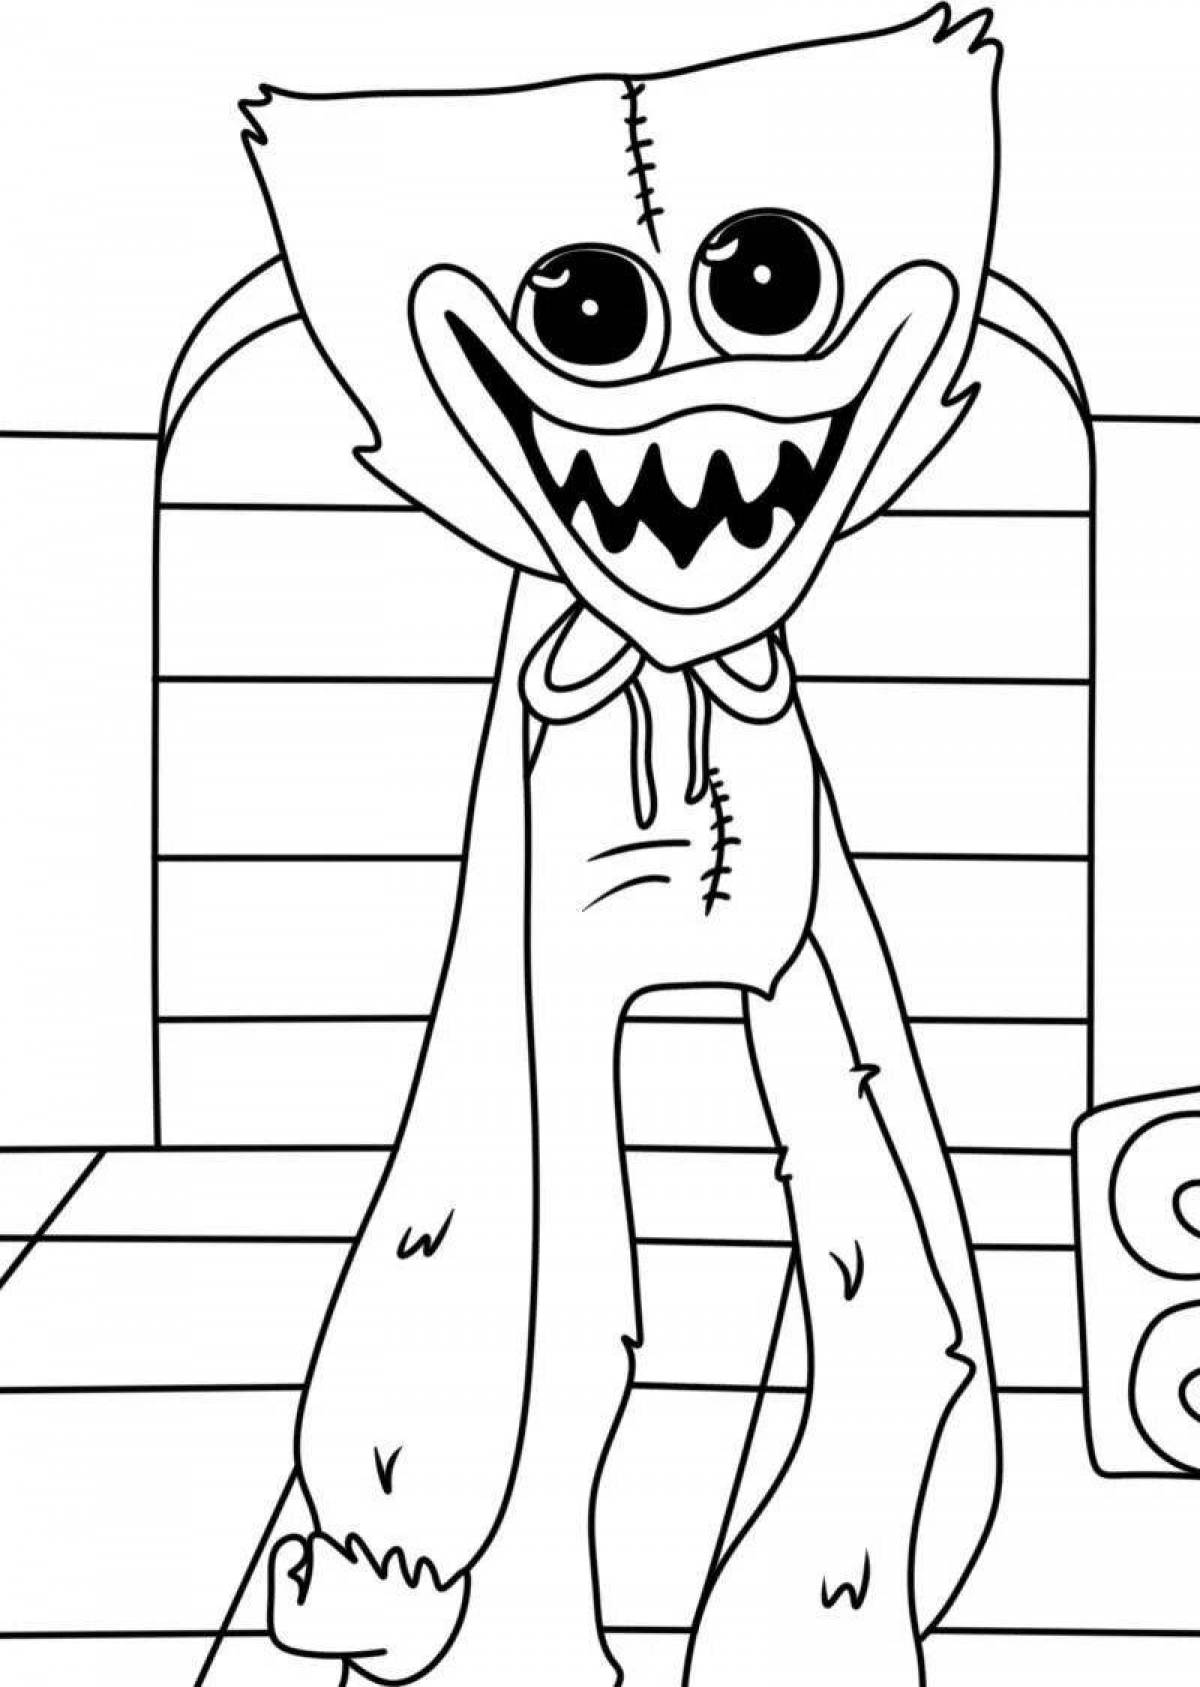 Killy willy bright coloring book